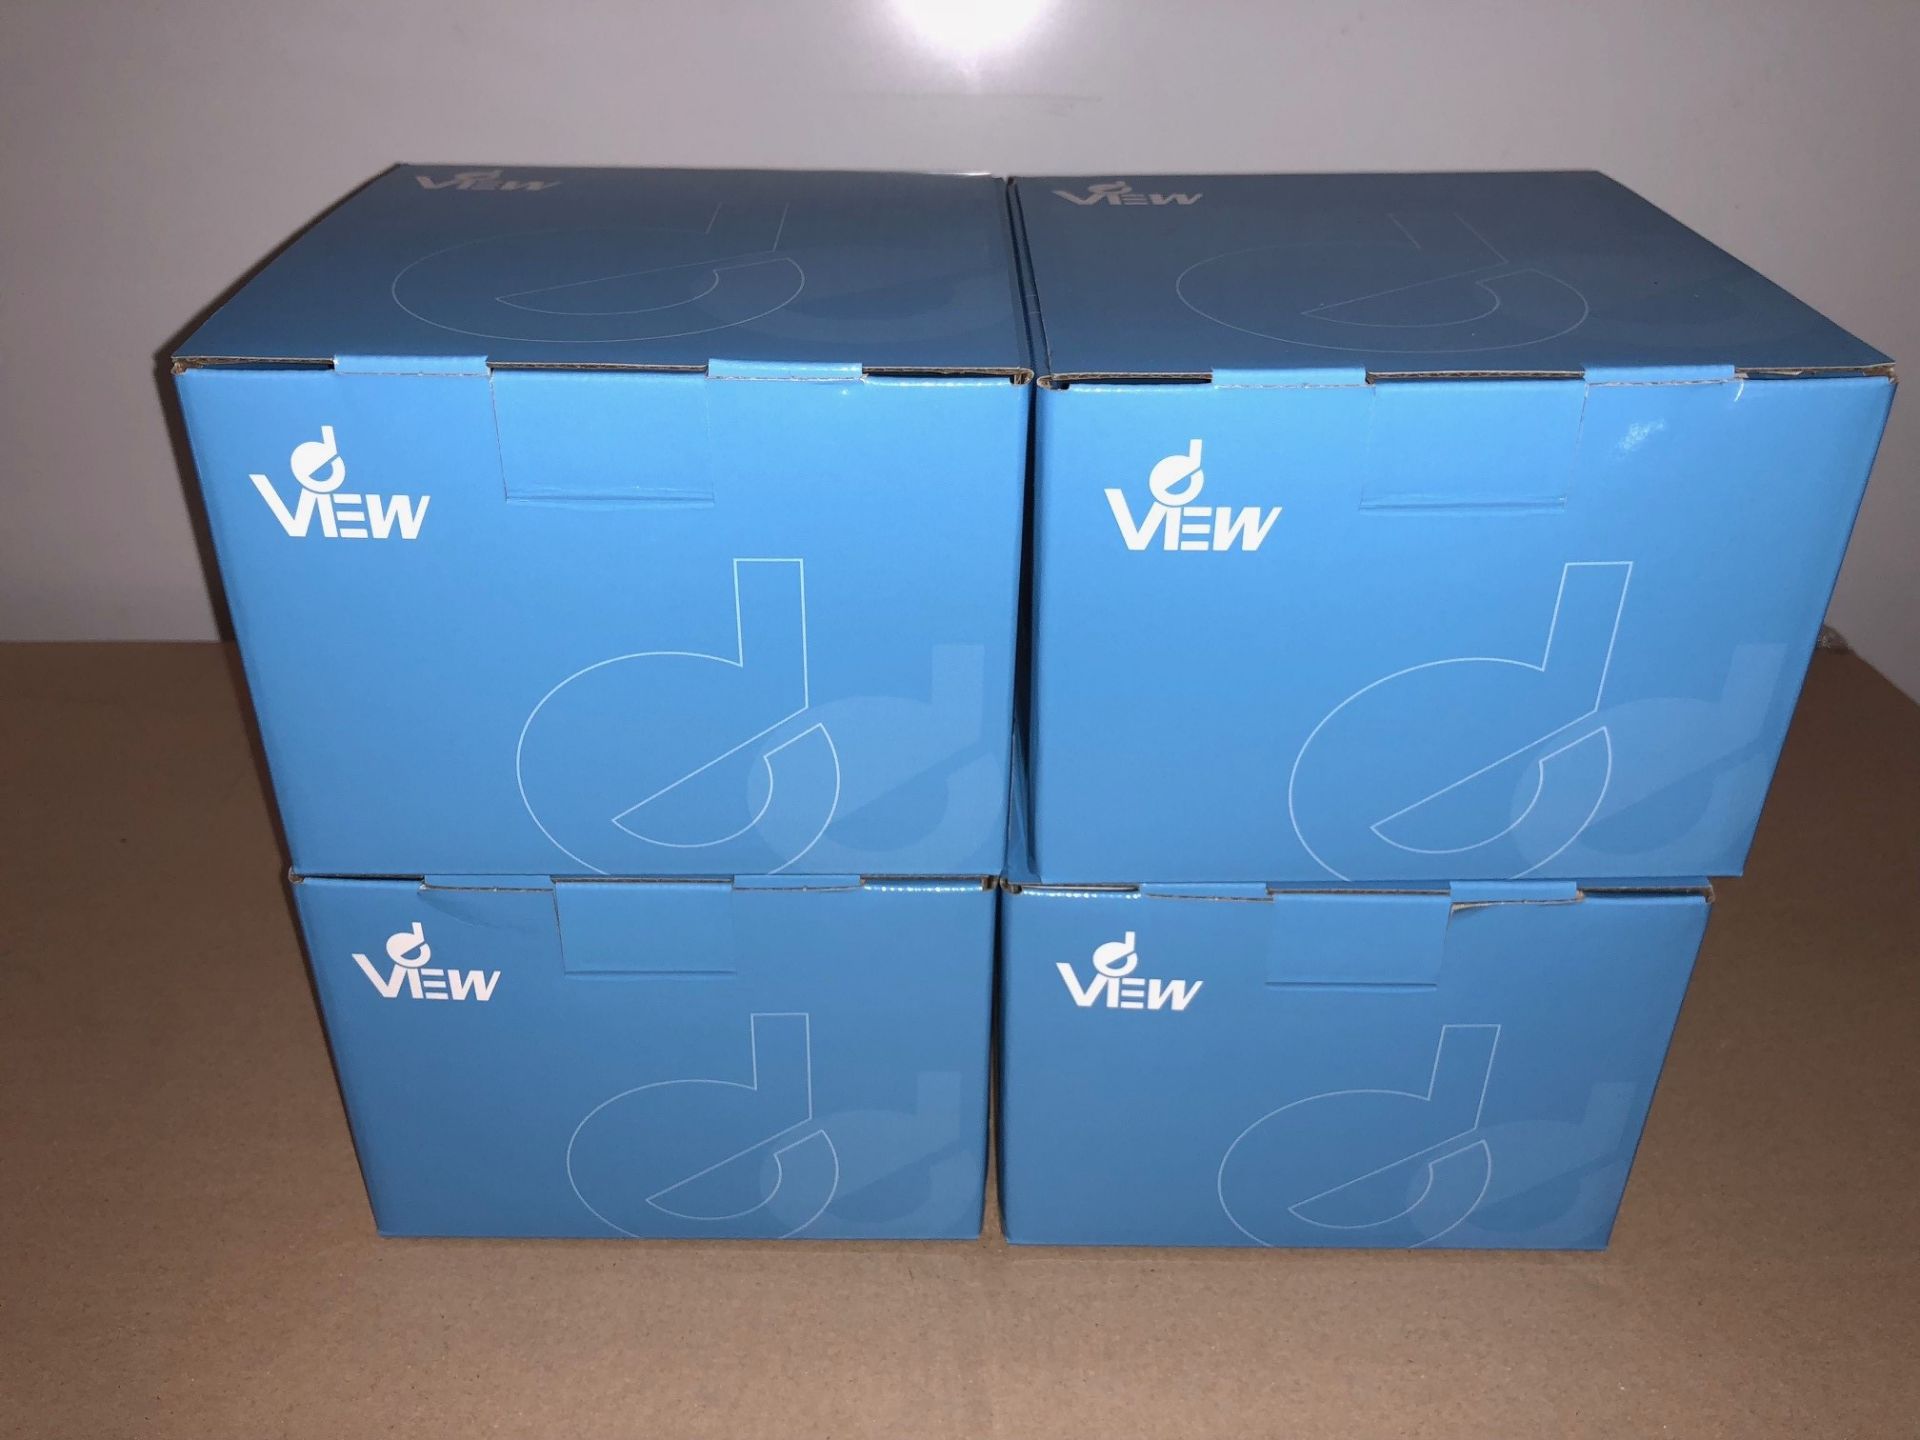 4 x dView CMOS Indoor Dome Cameras - 700TVL, SDN, PAL, 3.6mm - Model MD3SPC736T (Brand New & Boxed) - Image 3 of 3